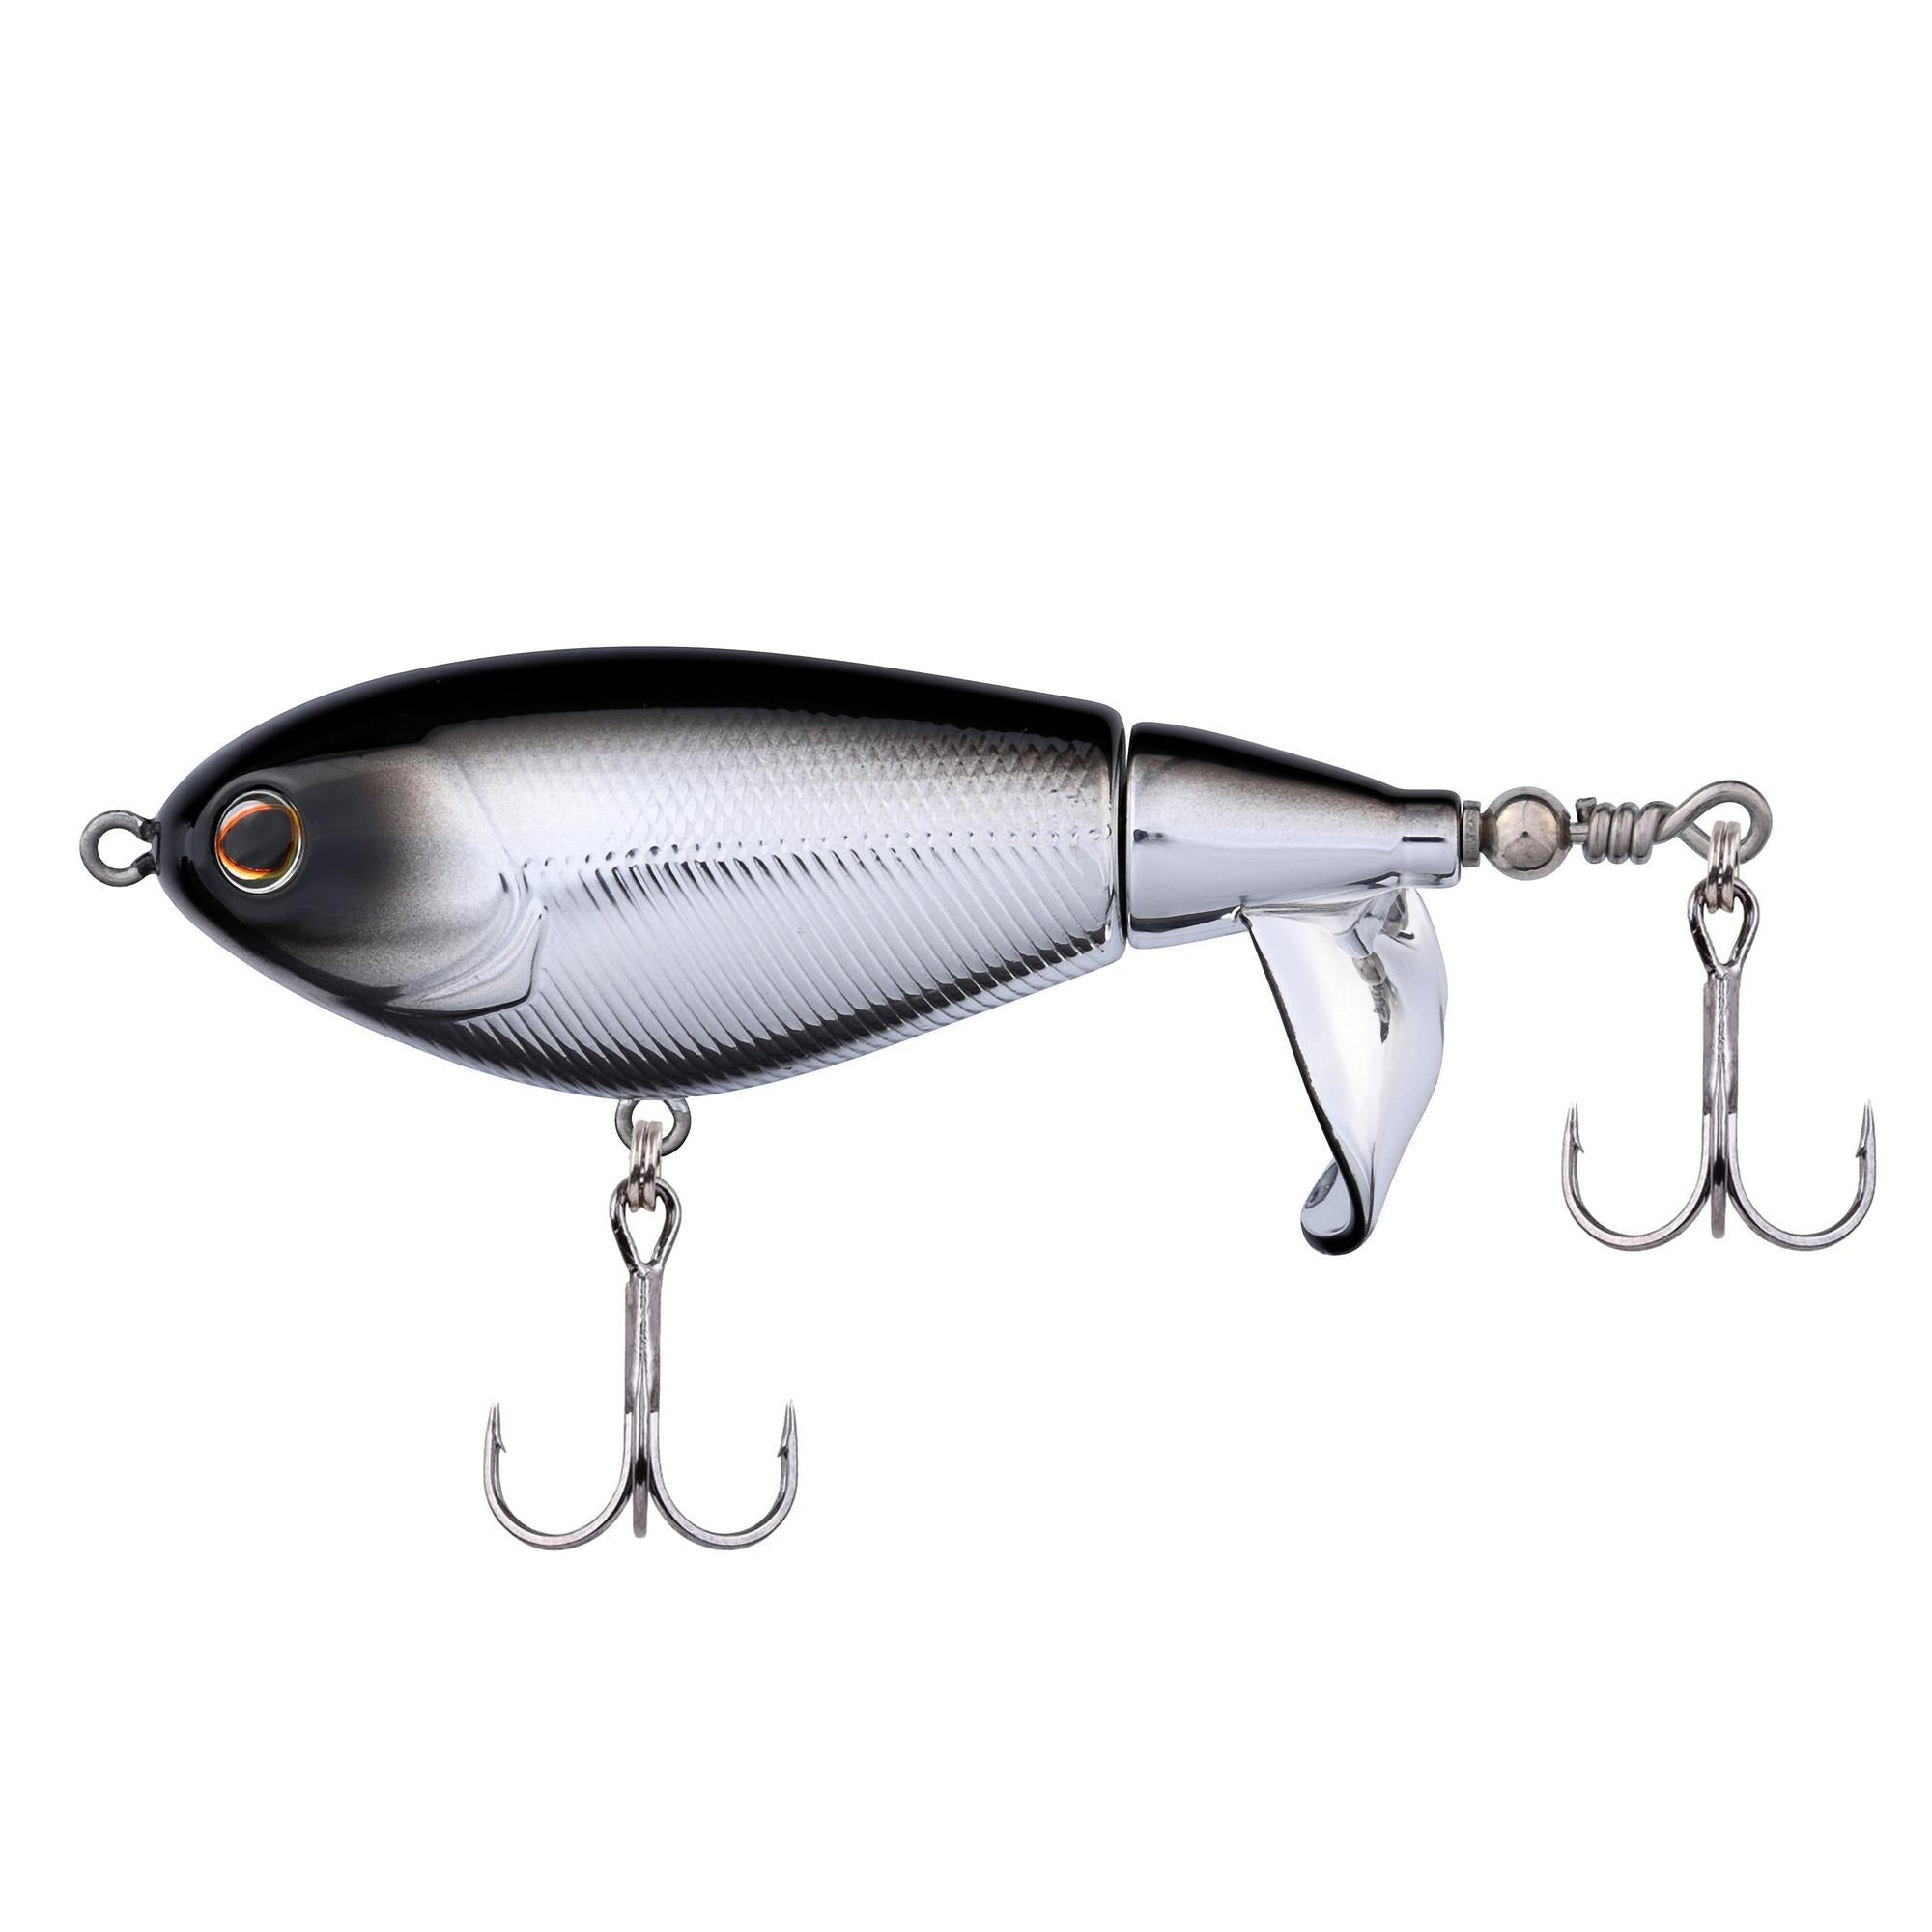  Berkley Spin Bomb Topwater Fishing Lure, Danald, 1/2 oz,   110mm, Spins at Slower Speeds with Maximum Spray, Equipped with Sharp  Fusion19 Hook : Sports & Outdoors